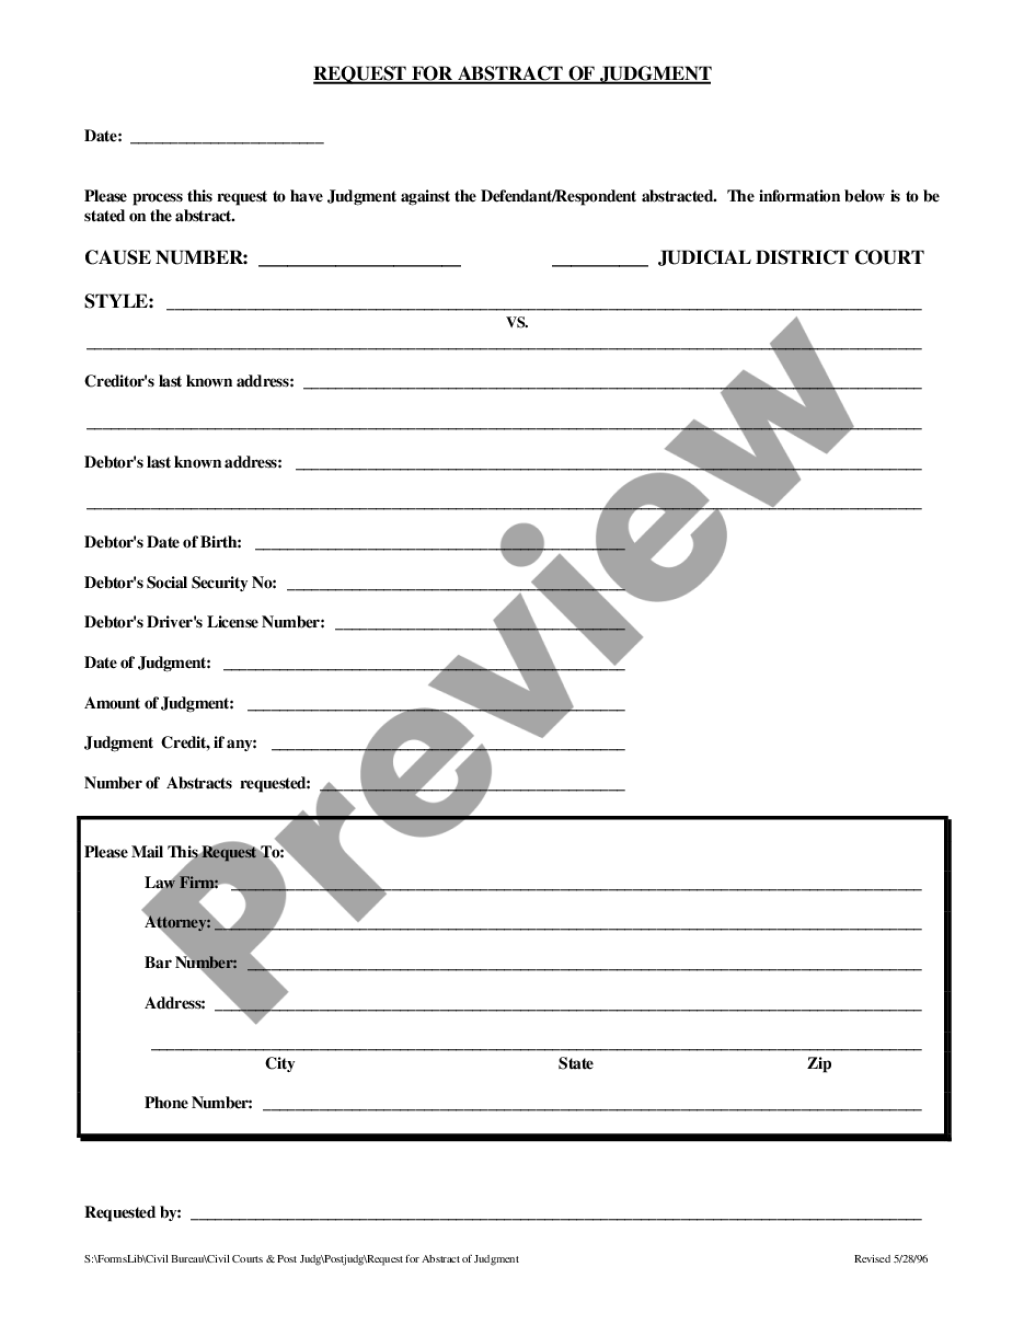 Picture of: Odessa Texas Request for Abstract of Judgment  US Legal Forms